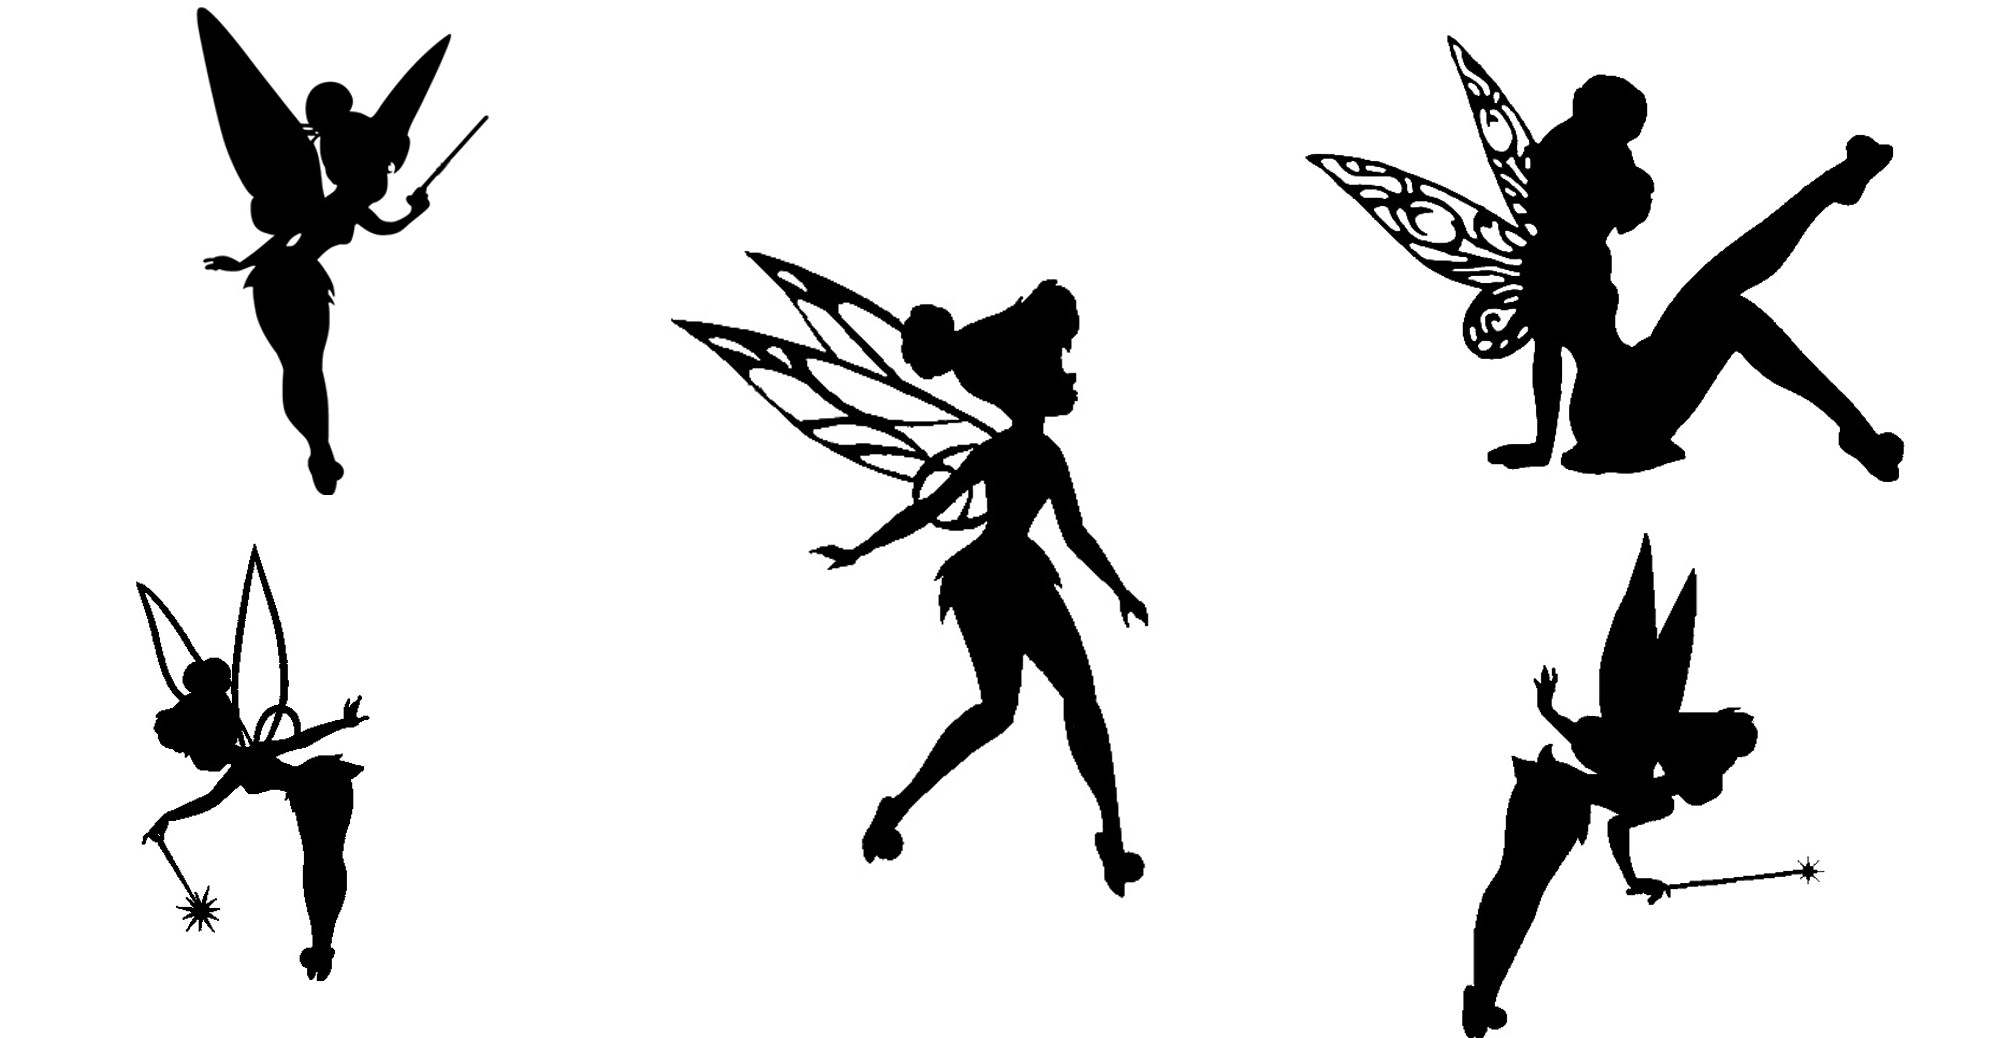 The Best Free Tinkerbell Silhouette Images Download From 350 Free Silhouettes Of Tinkerbell At 